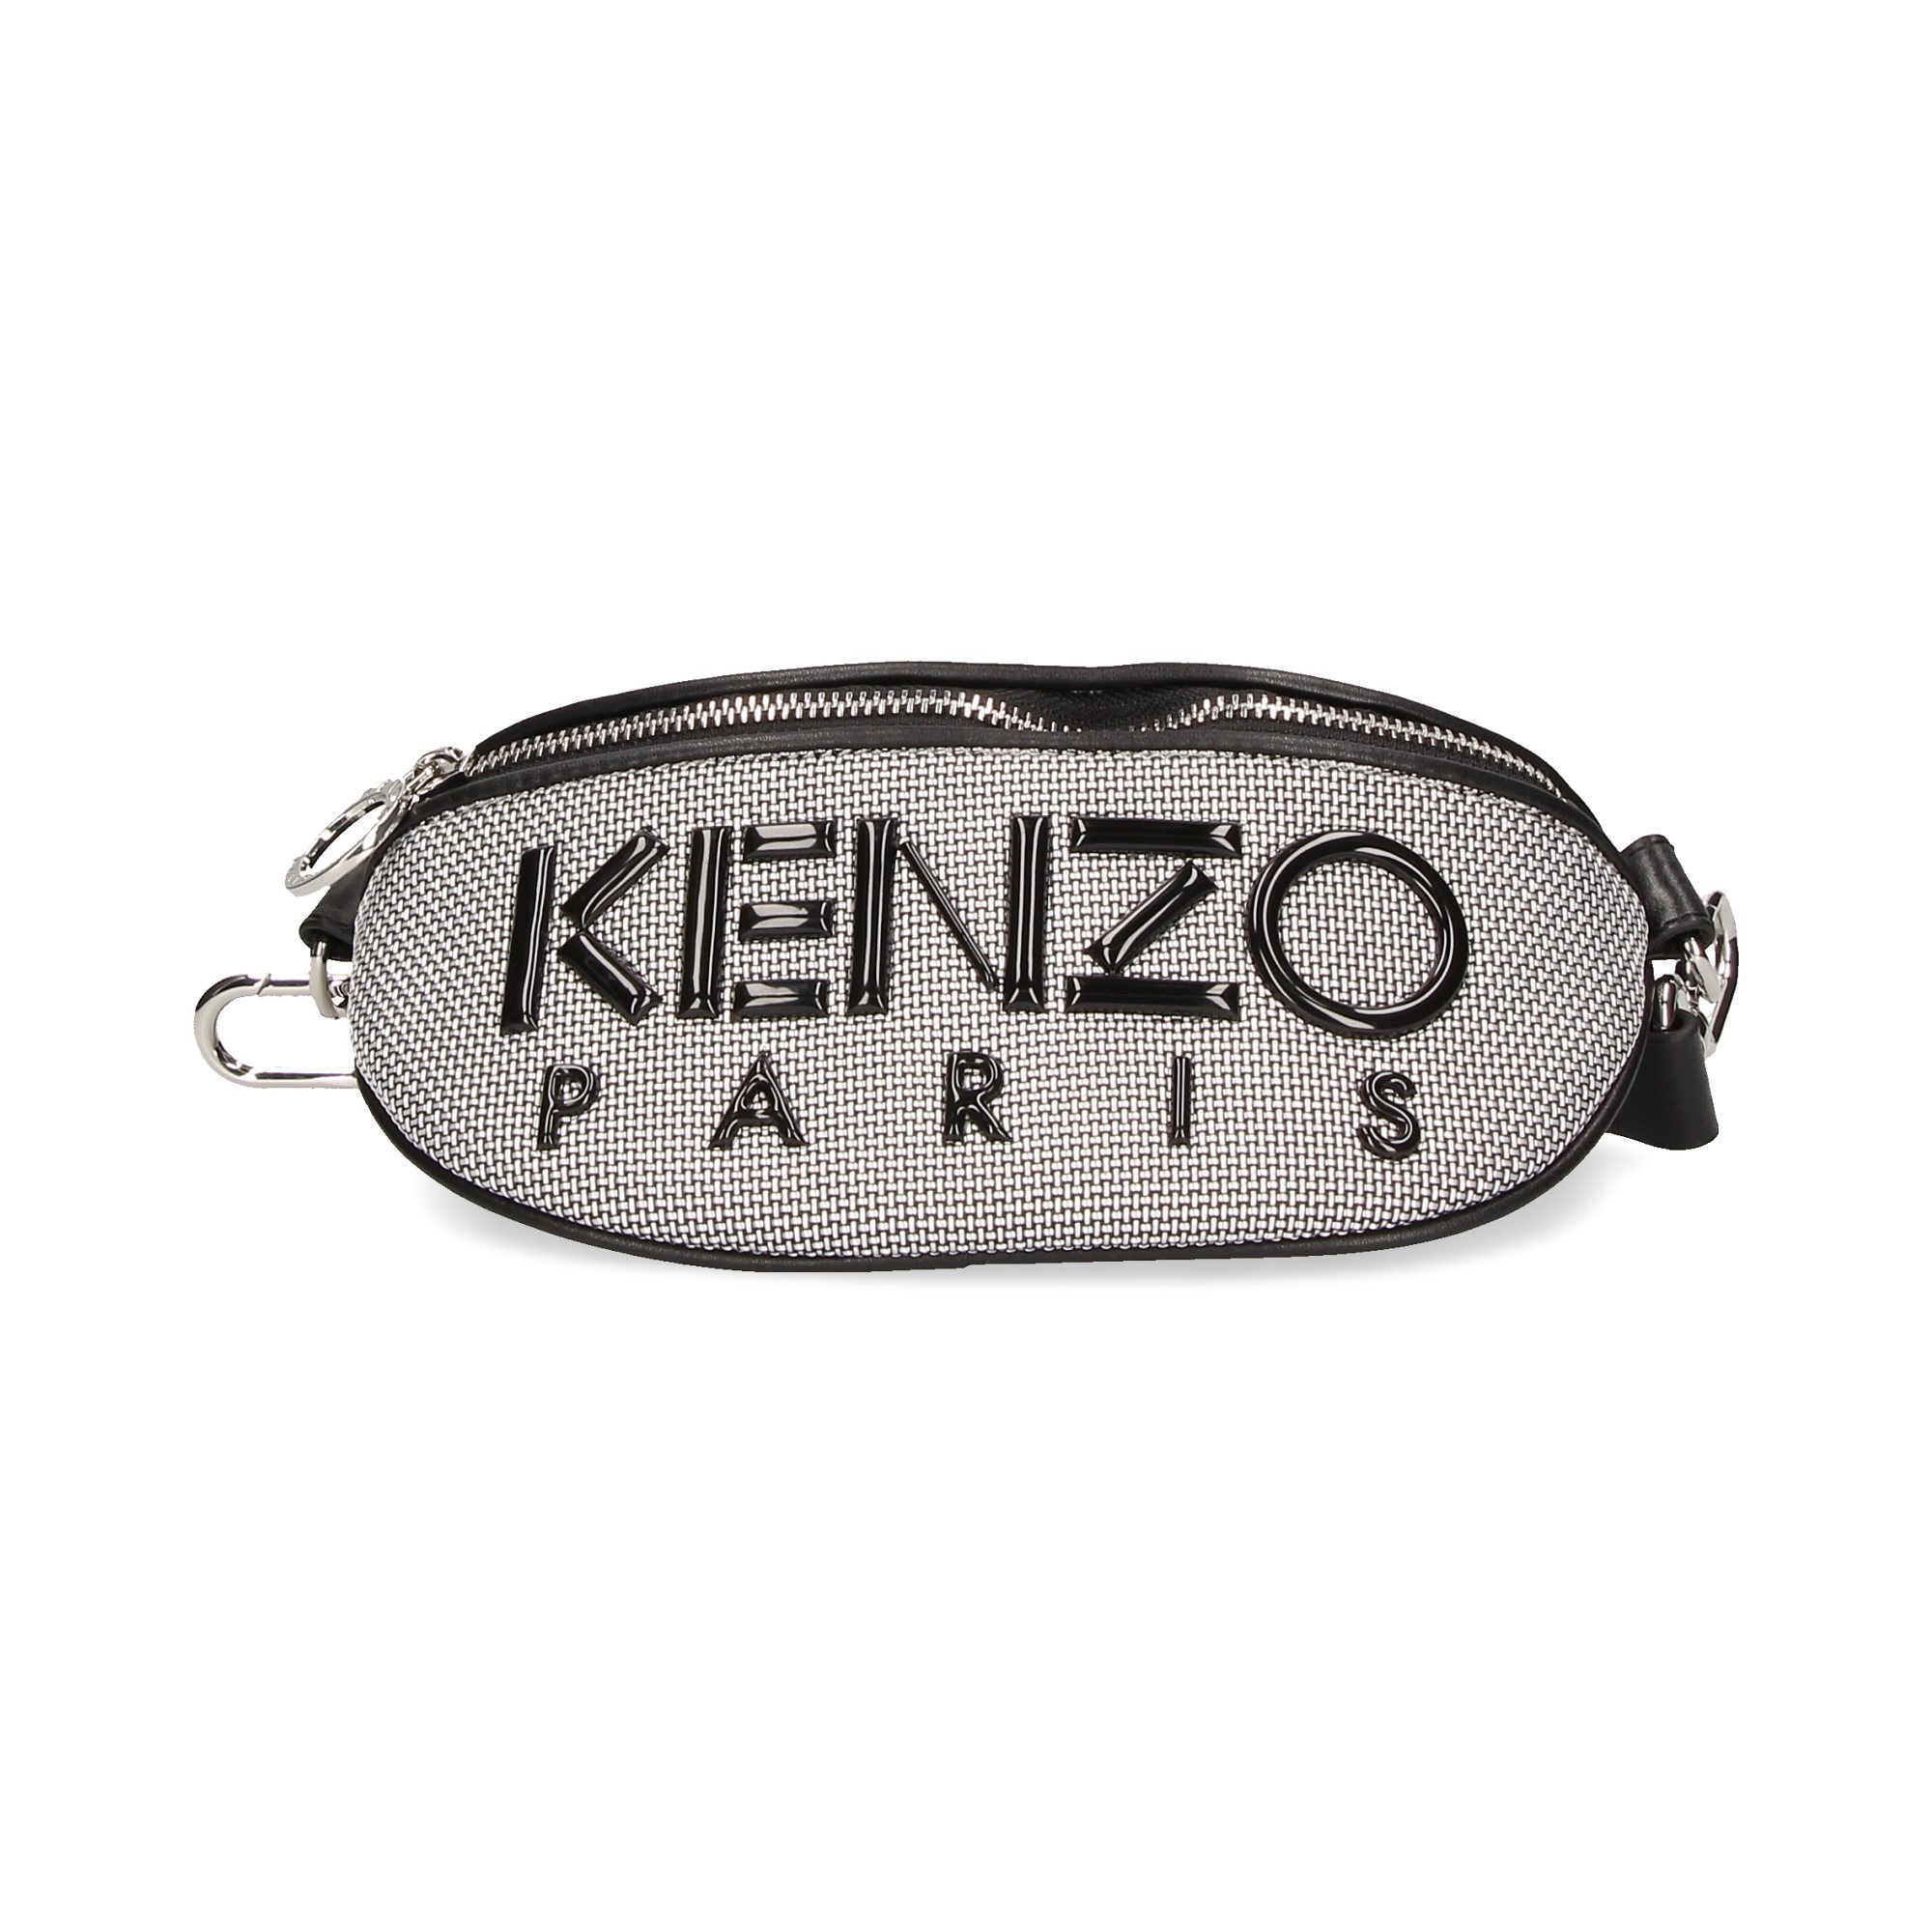 kenzo products